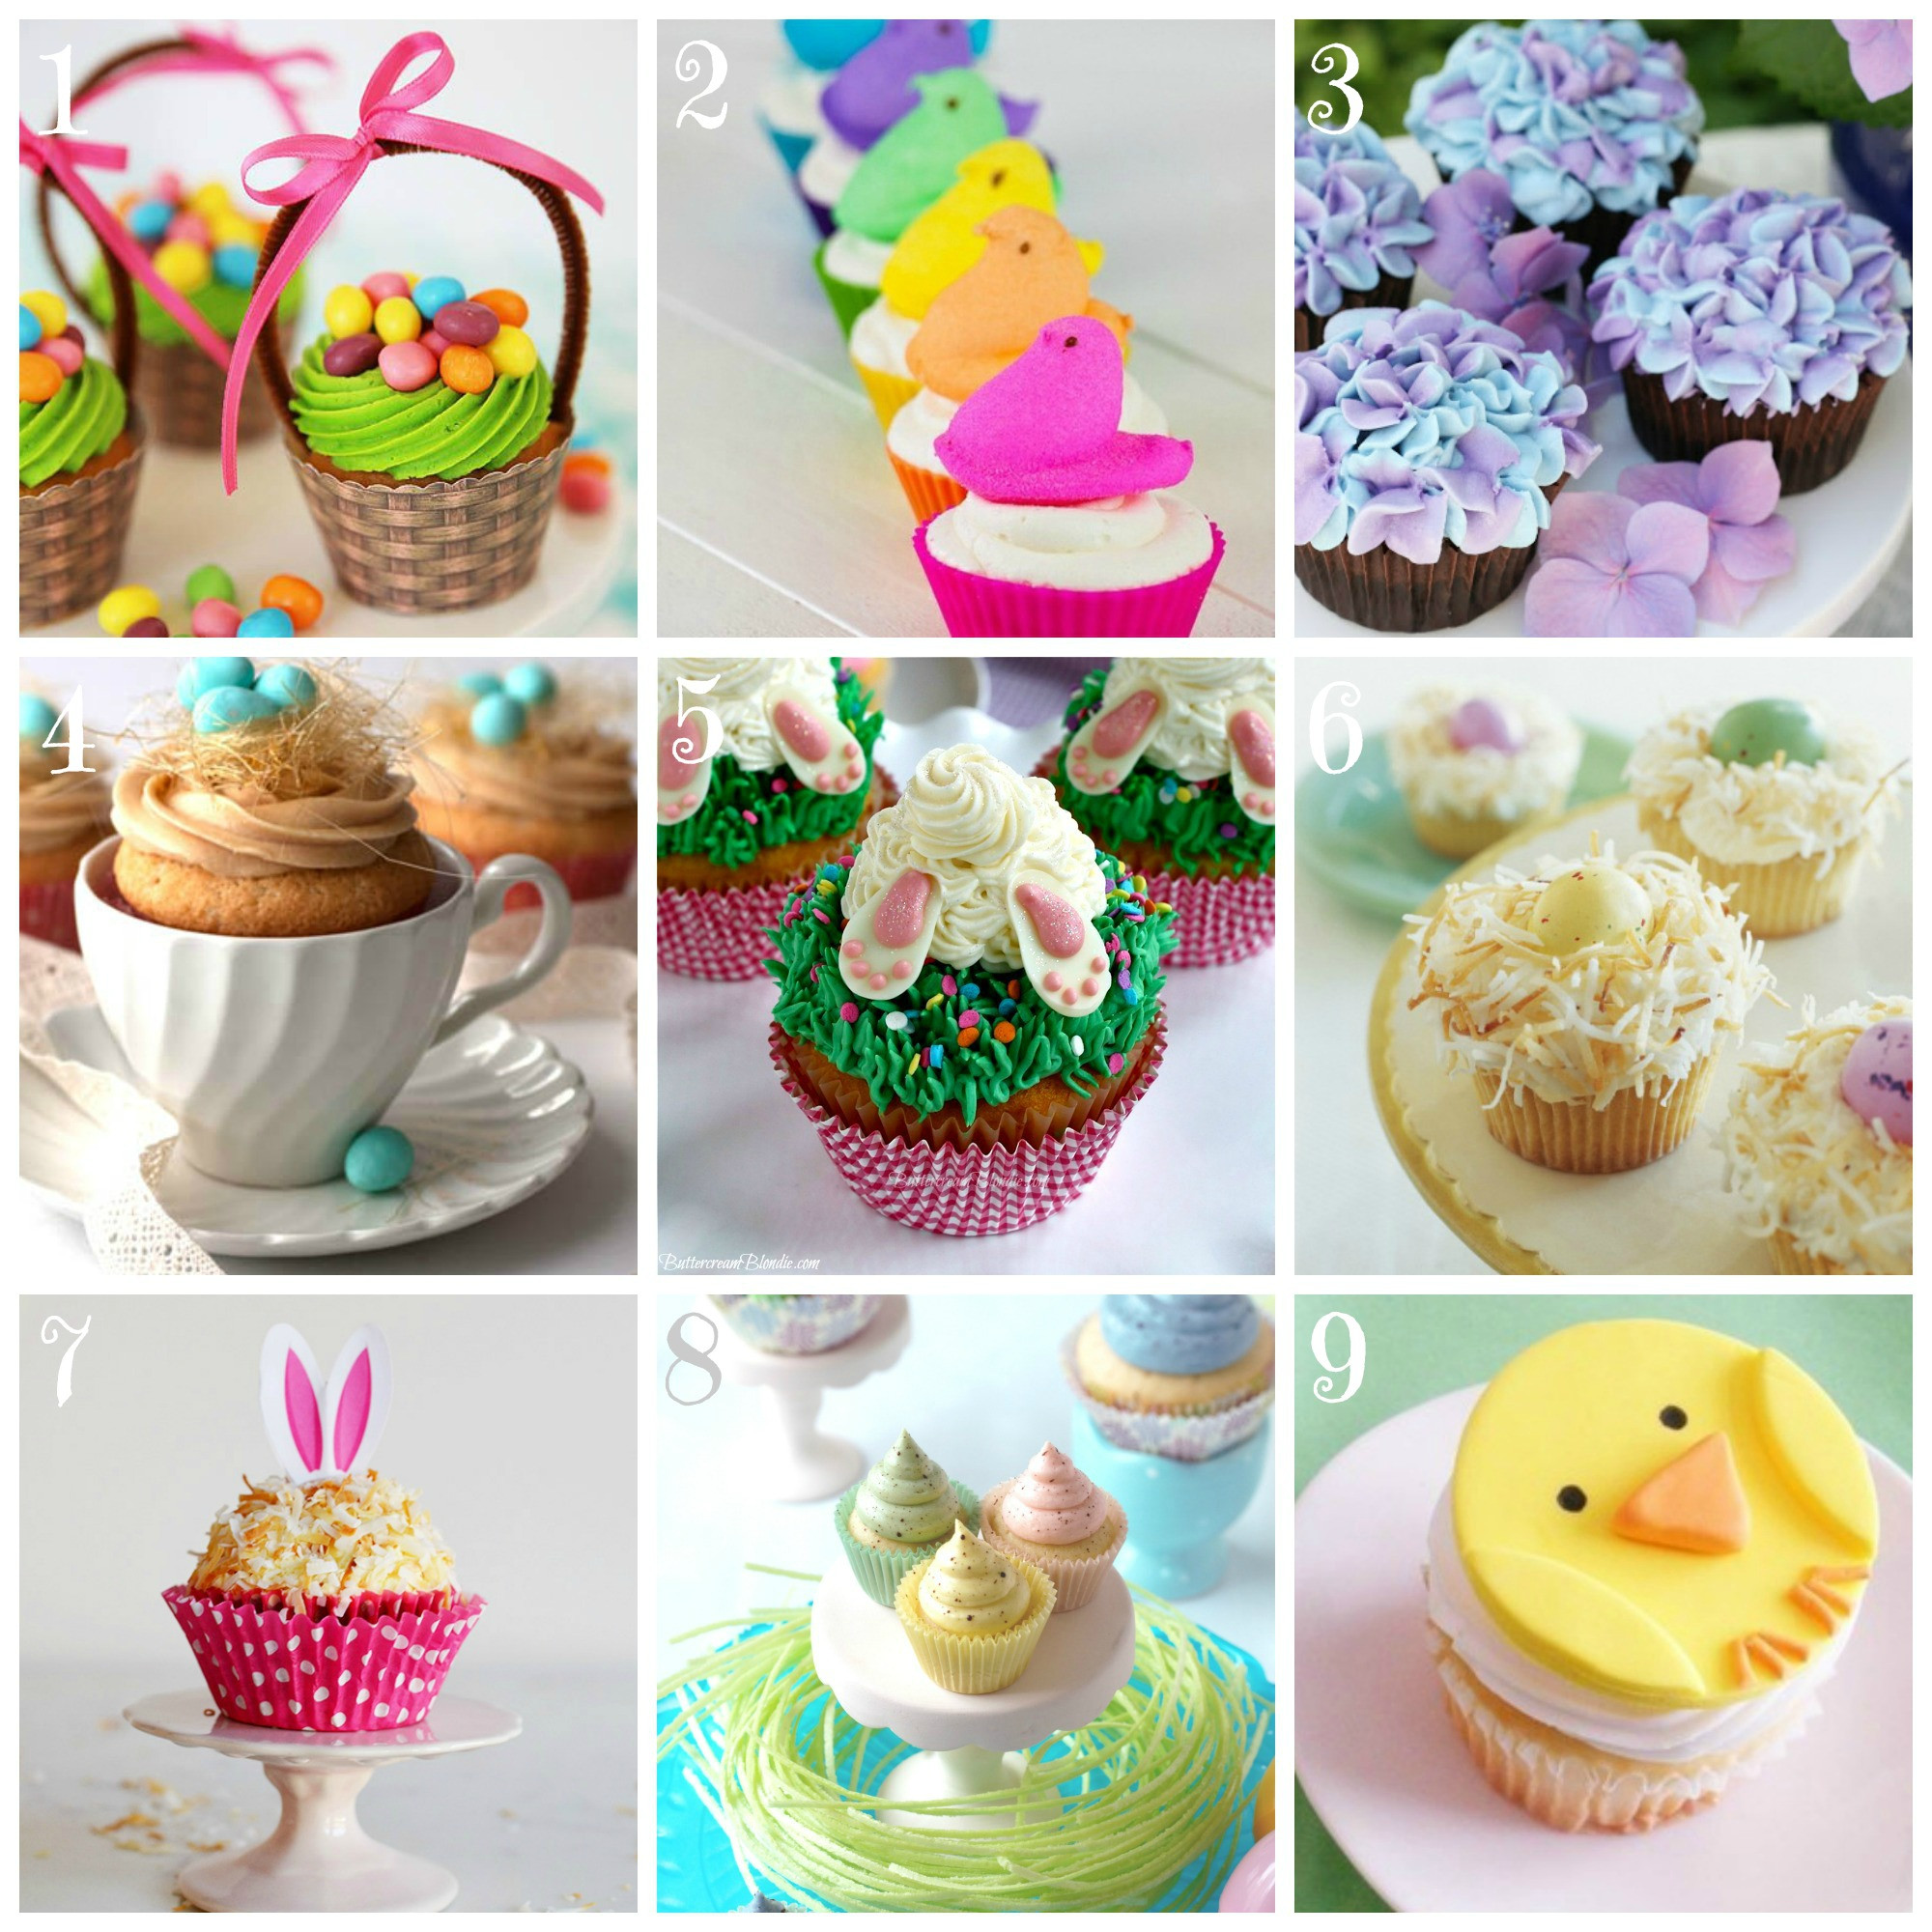 Cupcakes For Easter
 Top 9 Easter Cupcake Recipes